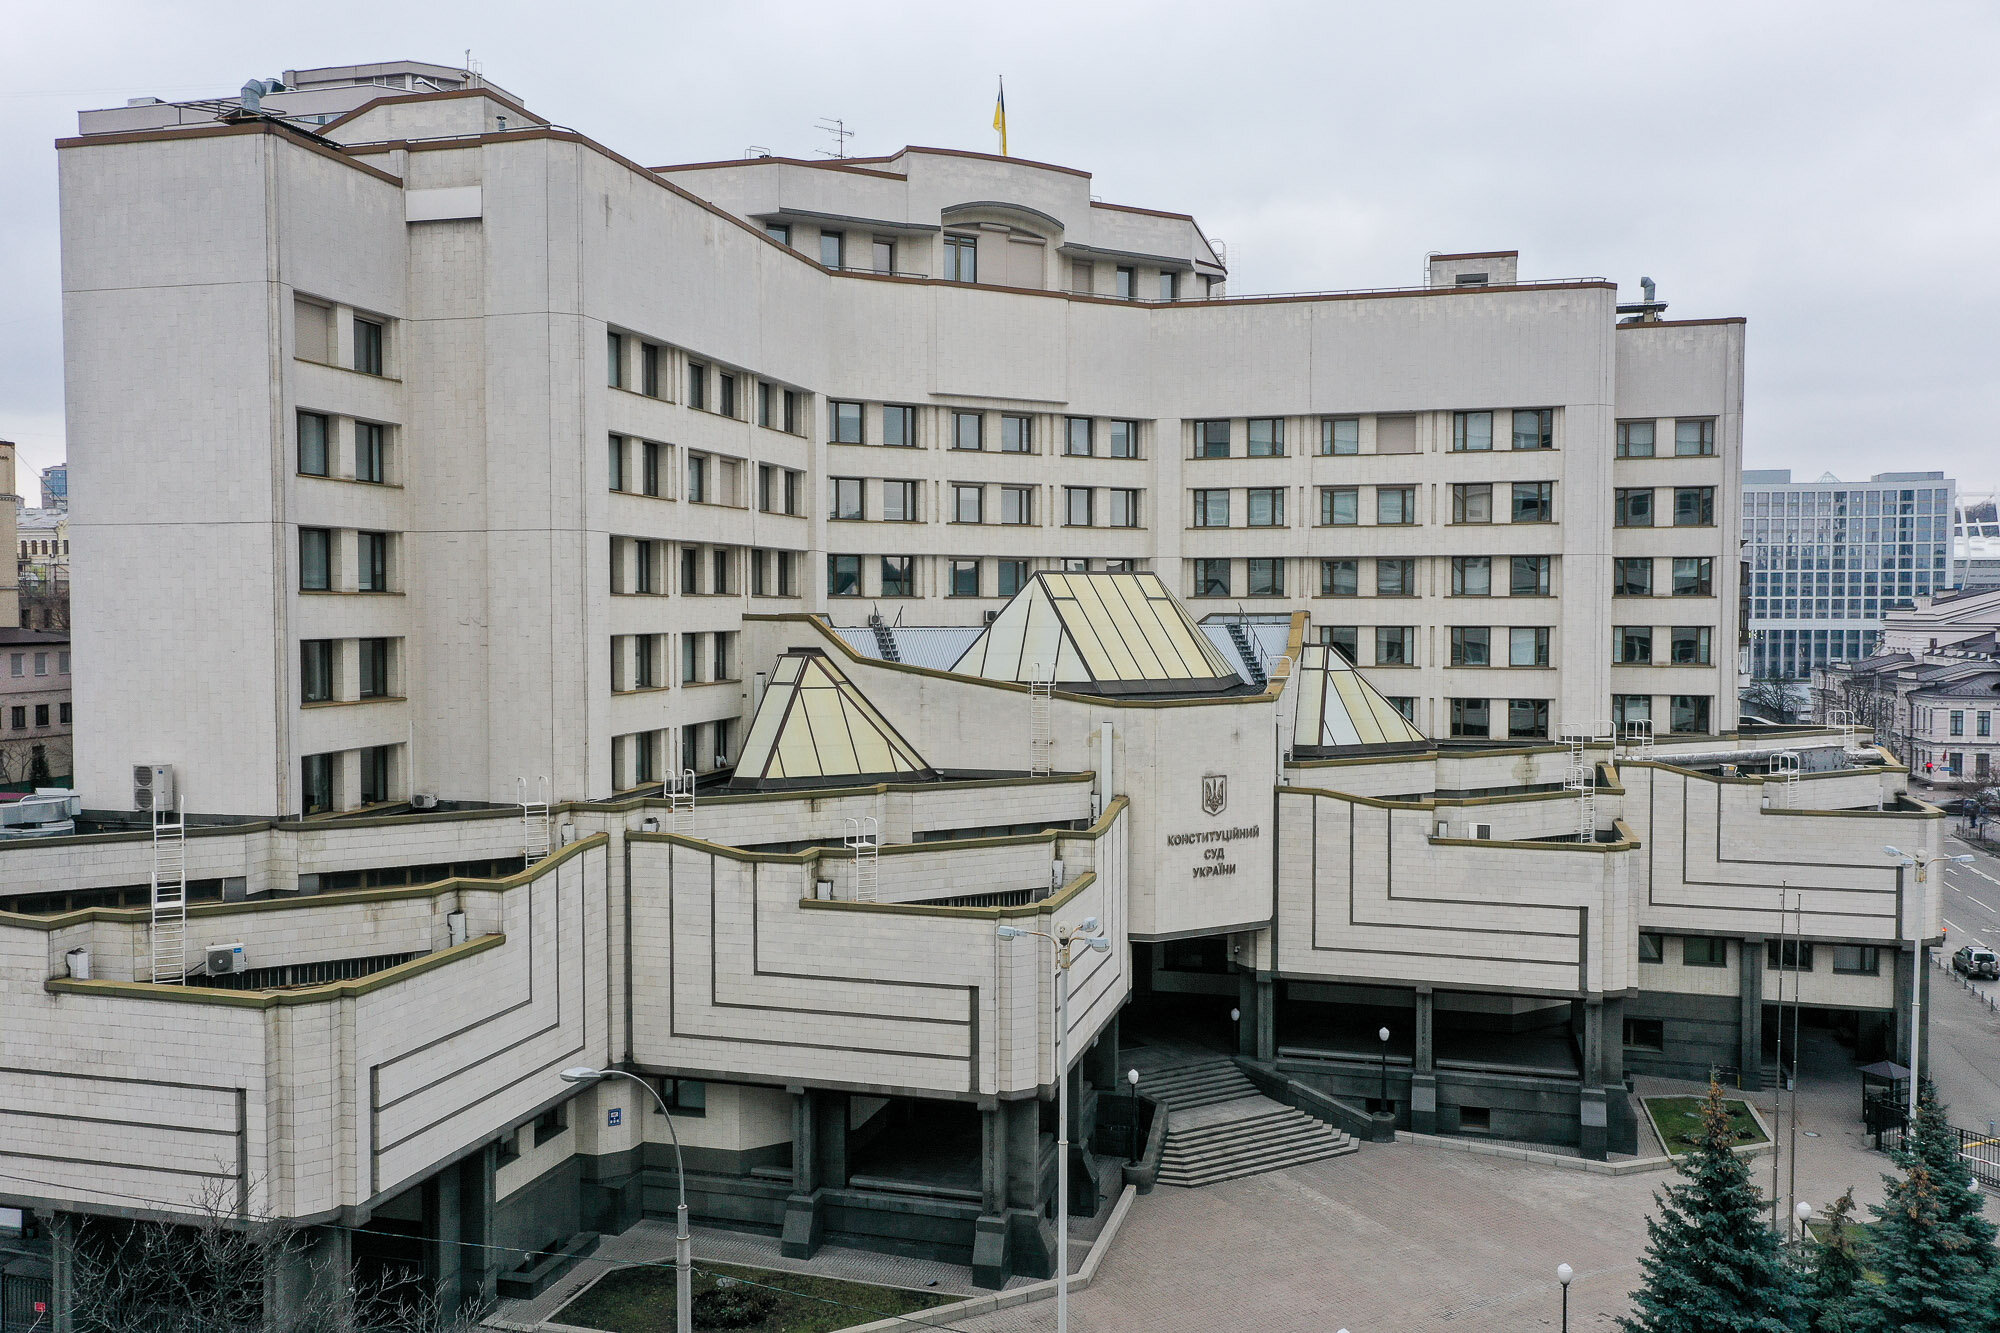 Ukraine&#8217;s Constitutional Court is located in downtown Kyiv near the Olimpiiska metro station.